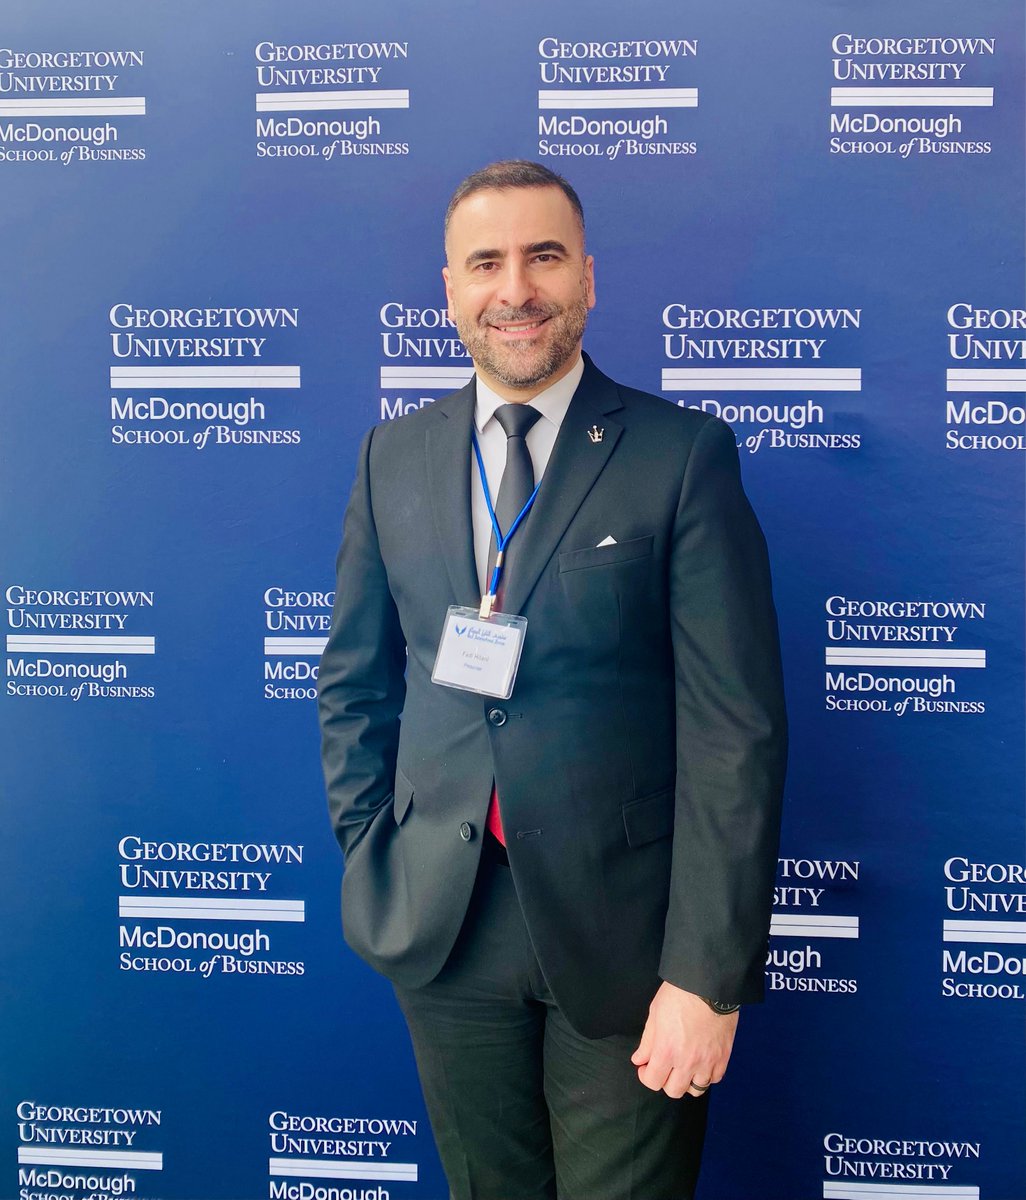 This week, NCUSAR Senior Fellow Dr. Fadi Hilani @hilani_fadi presented his research paper, titled “Rethinking Strategies of Defense, Security, and Economy in the U.S.-Arab Gulf Foreign Policy” at the first annual Gulf Studies Symposium, organized by @Gulf_Research @GulfIntlForum